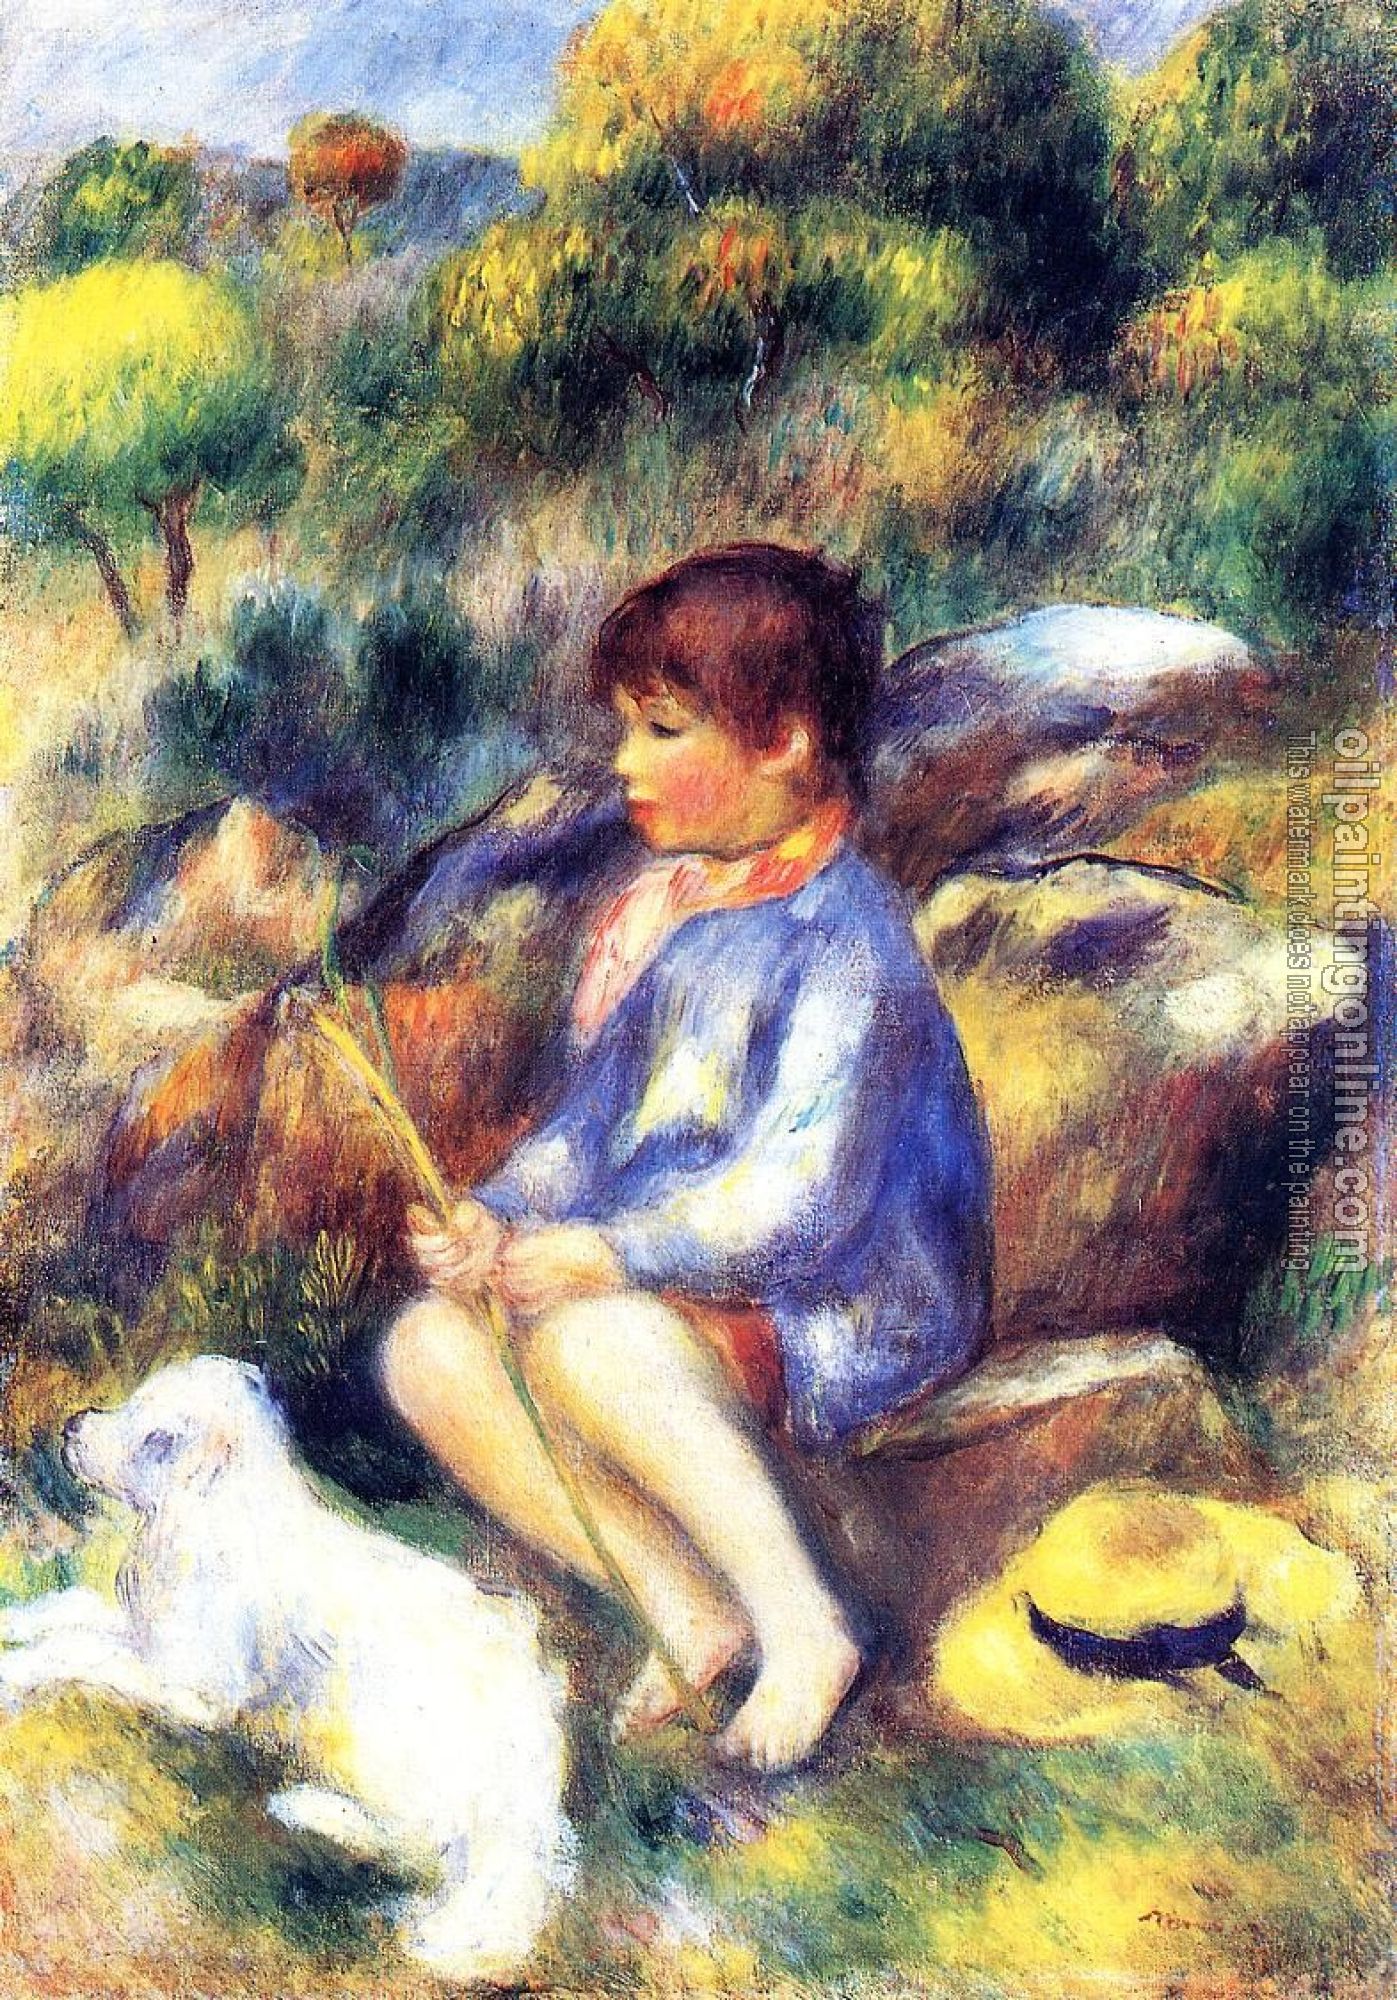 Renoir, Pierre Auguste - Young Boy by the River